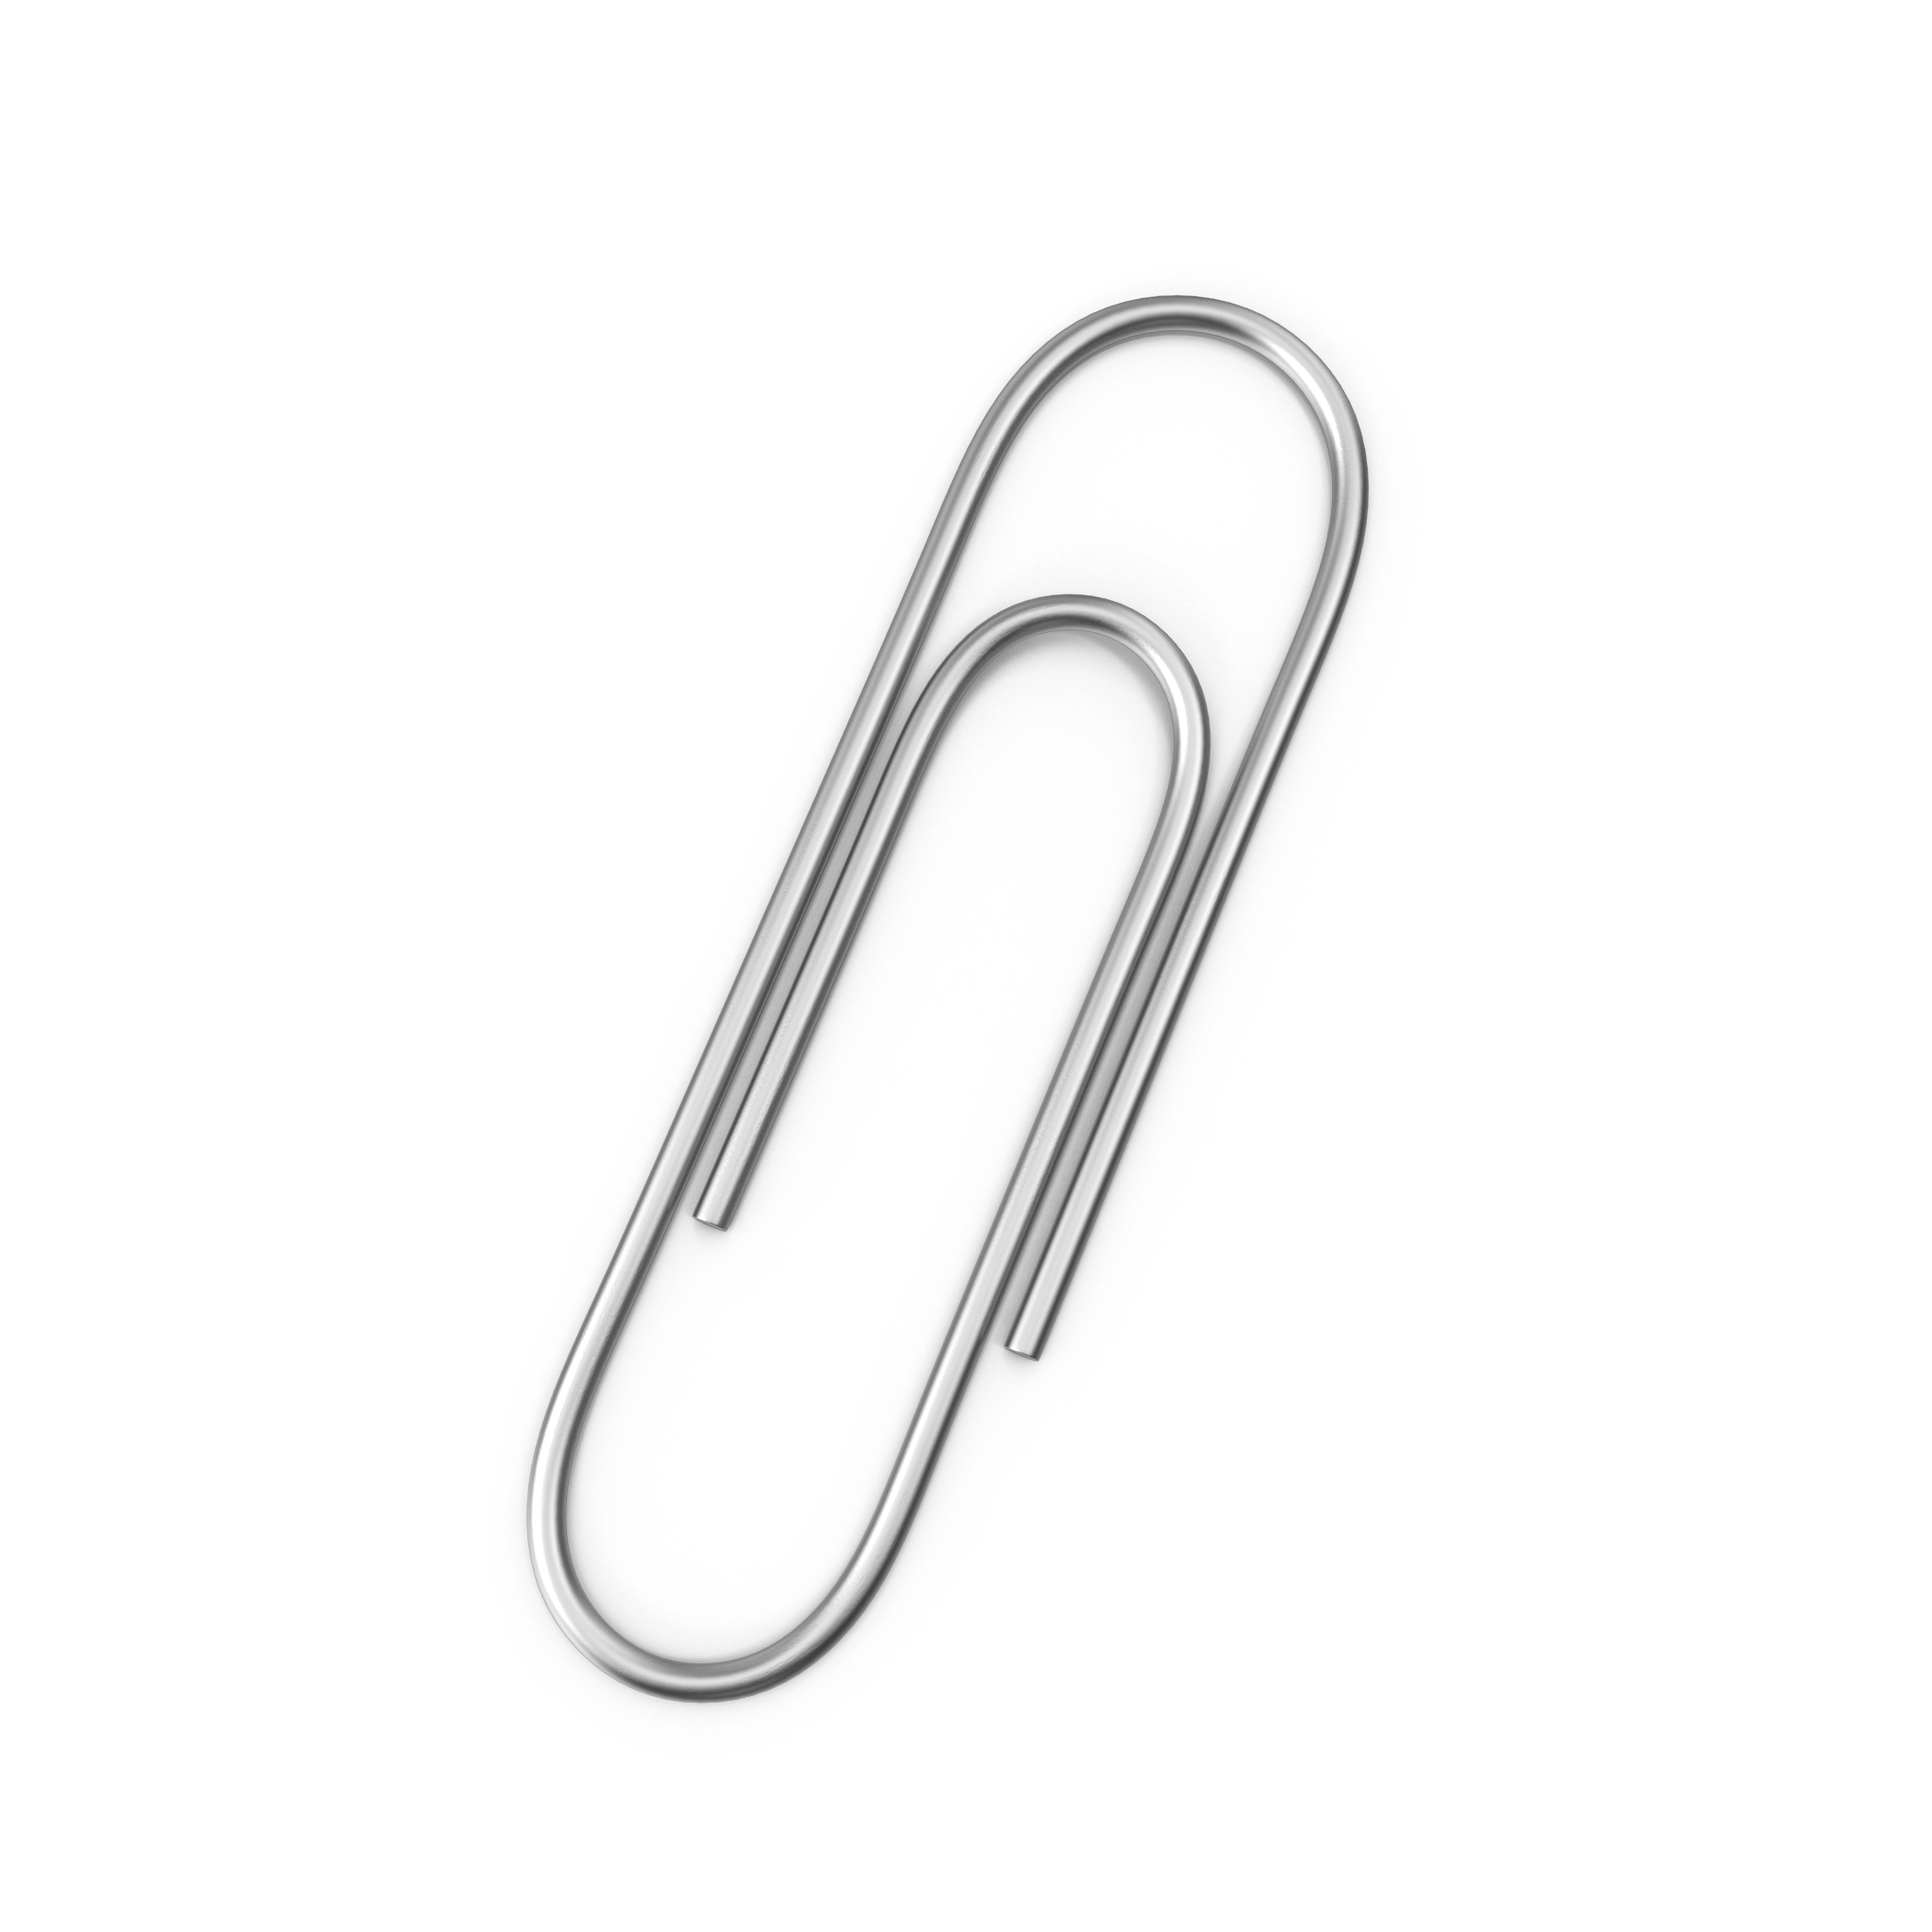 In 1899, William Middlebrook of Waterbury, CT filed a patent for the "gem clip," the paperclip as we know it today. Nearly 100 years later, orthopedic surgeon and medical inventor Dr. Gary K. Michelson invented a new kind of paperclip, designed for people with motor difficulties or difficulty using their hands.